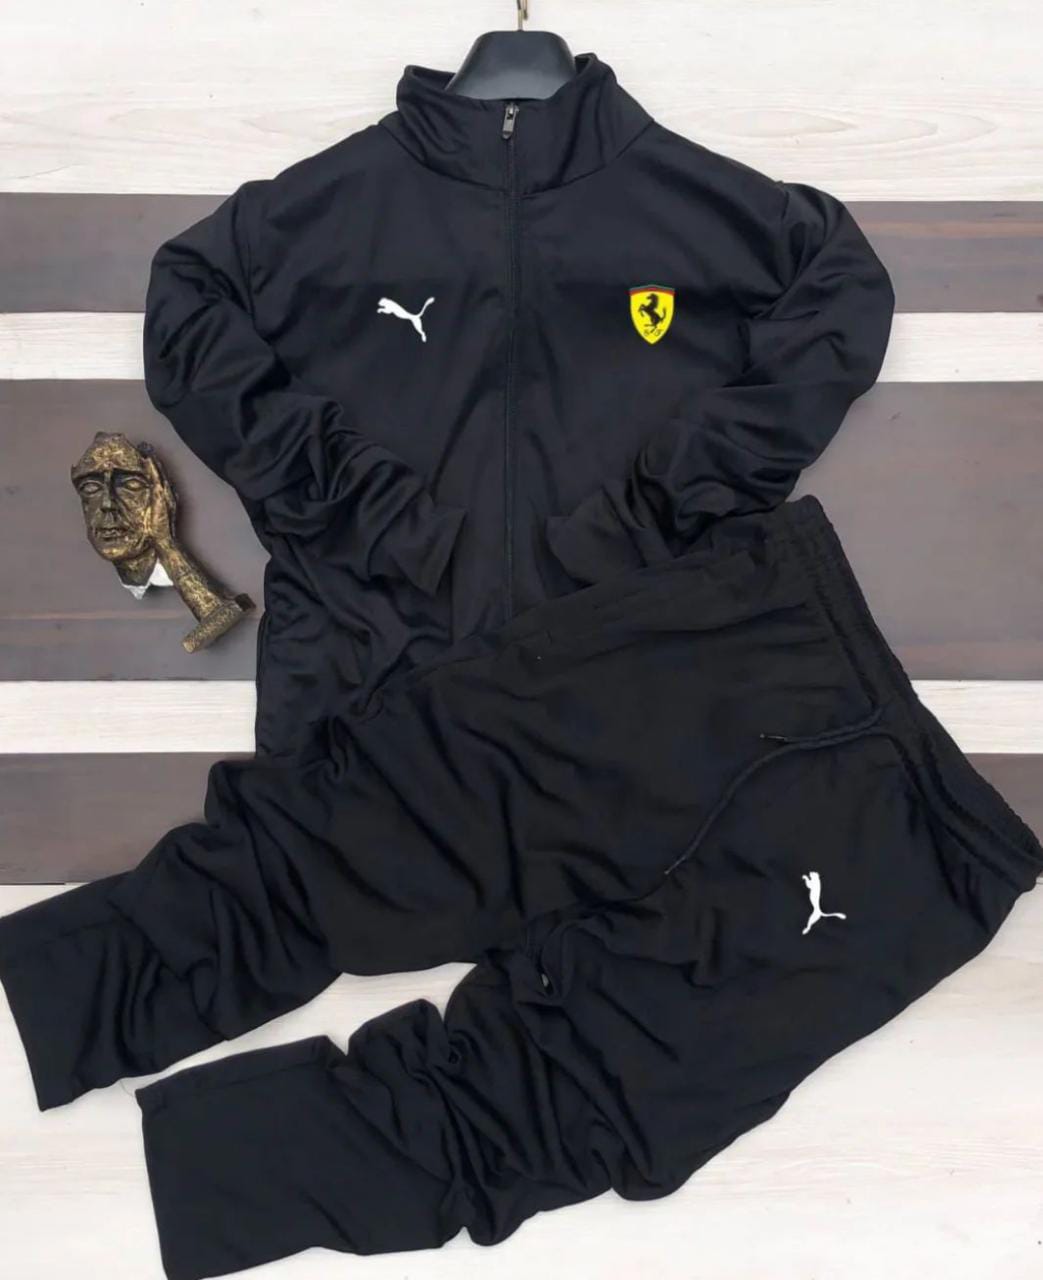 Details View - PUMA AND ADIDAS TRACK SUIT photos - reseller,reseller marketplace,advetising your products,reseller bazzar,resellerbazzar.in,india's classified site,ADIDAS TRACK SUIT | PUMA TRACK SUIT | ADIDAS TRACK SUIT in Ahmedabad | PUMA TRACK SUIT in Ahmedabad